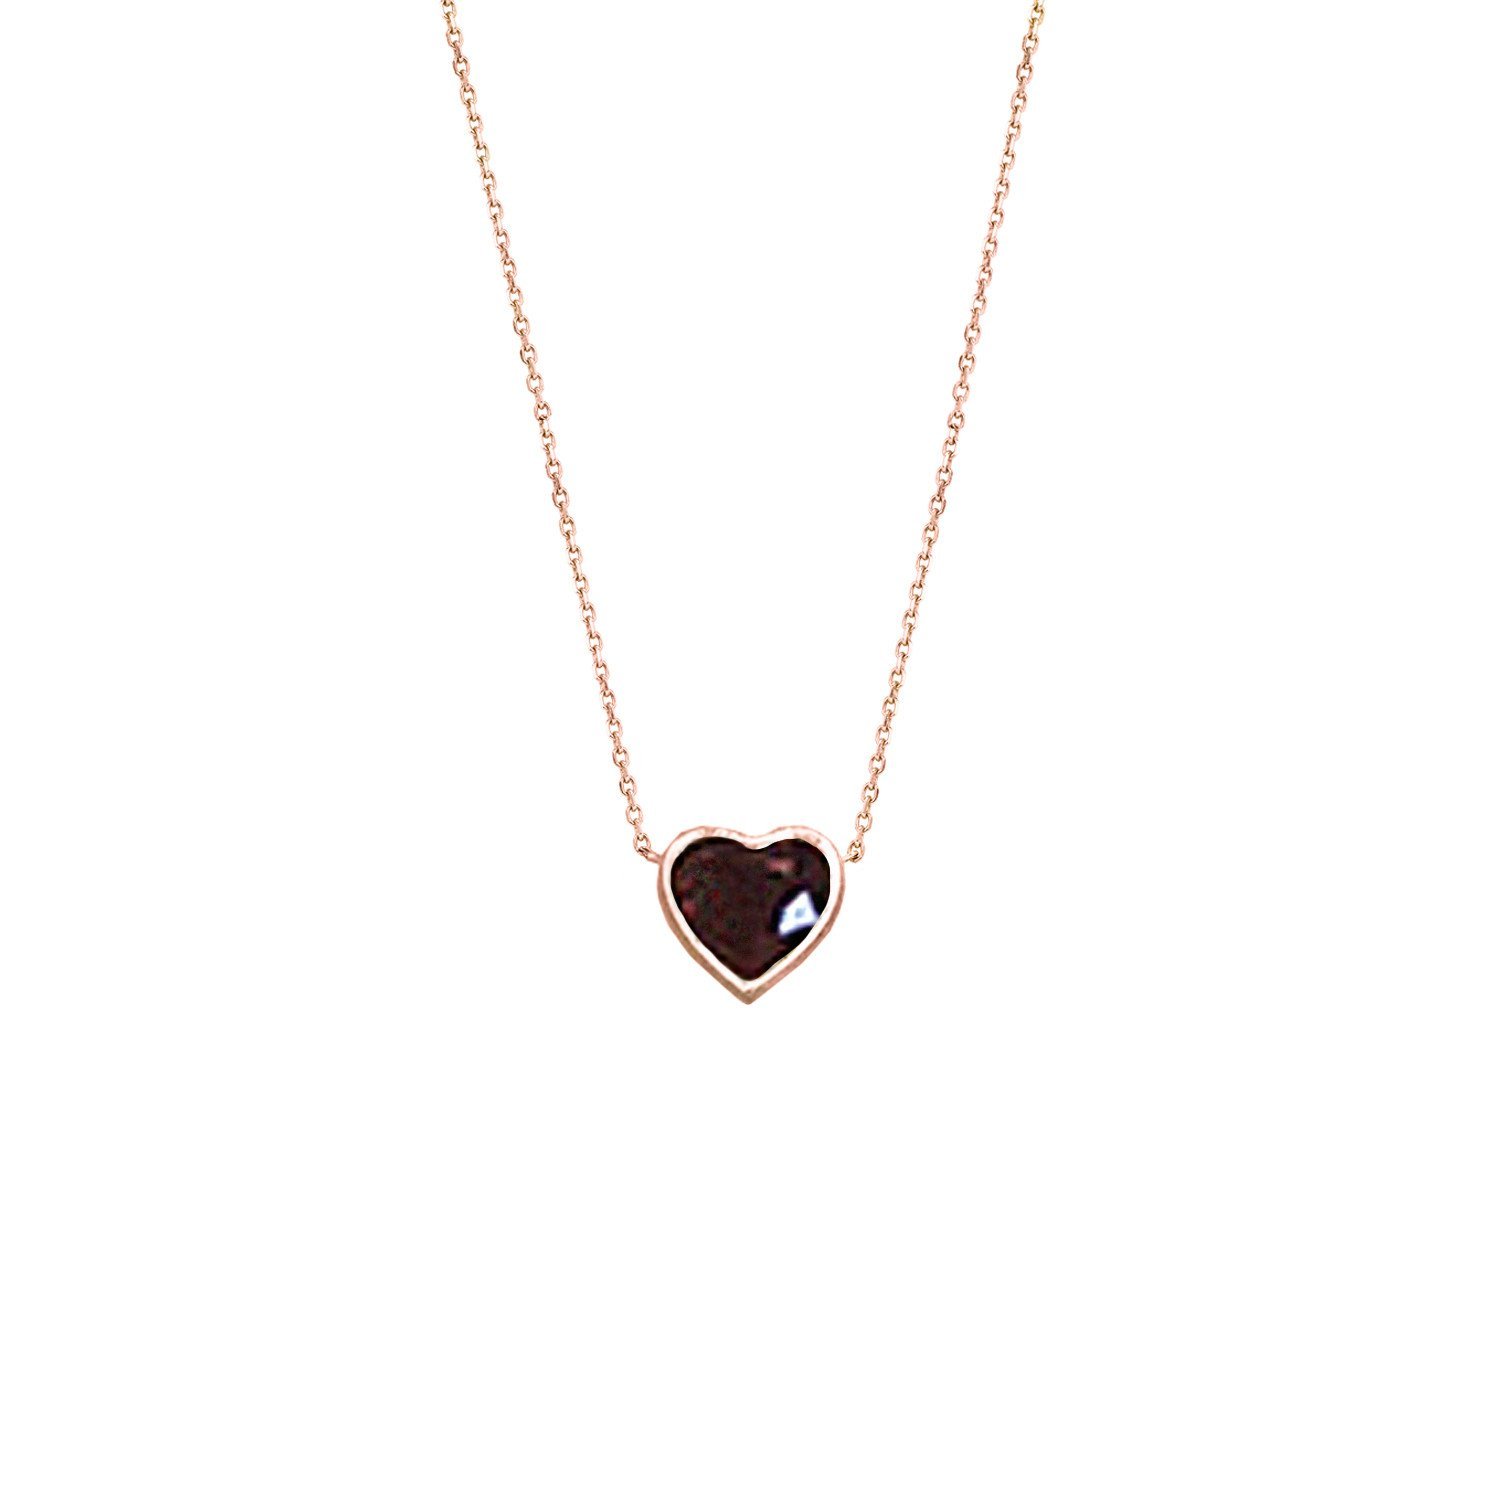 New! Floating Heart Shaped Ruby Necklace - Logan Hollowell Jewelry